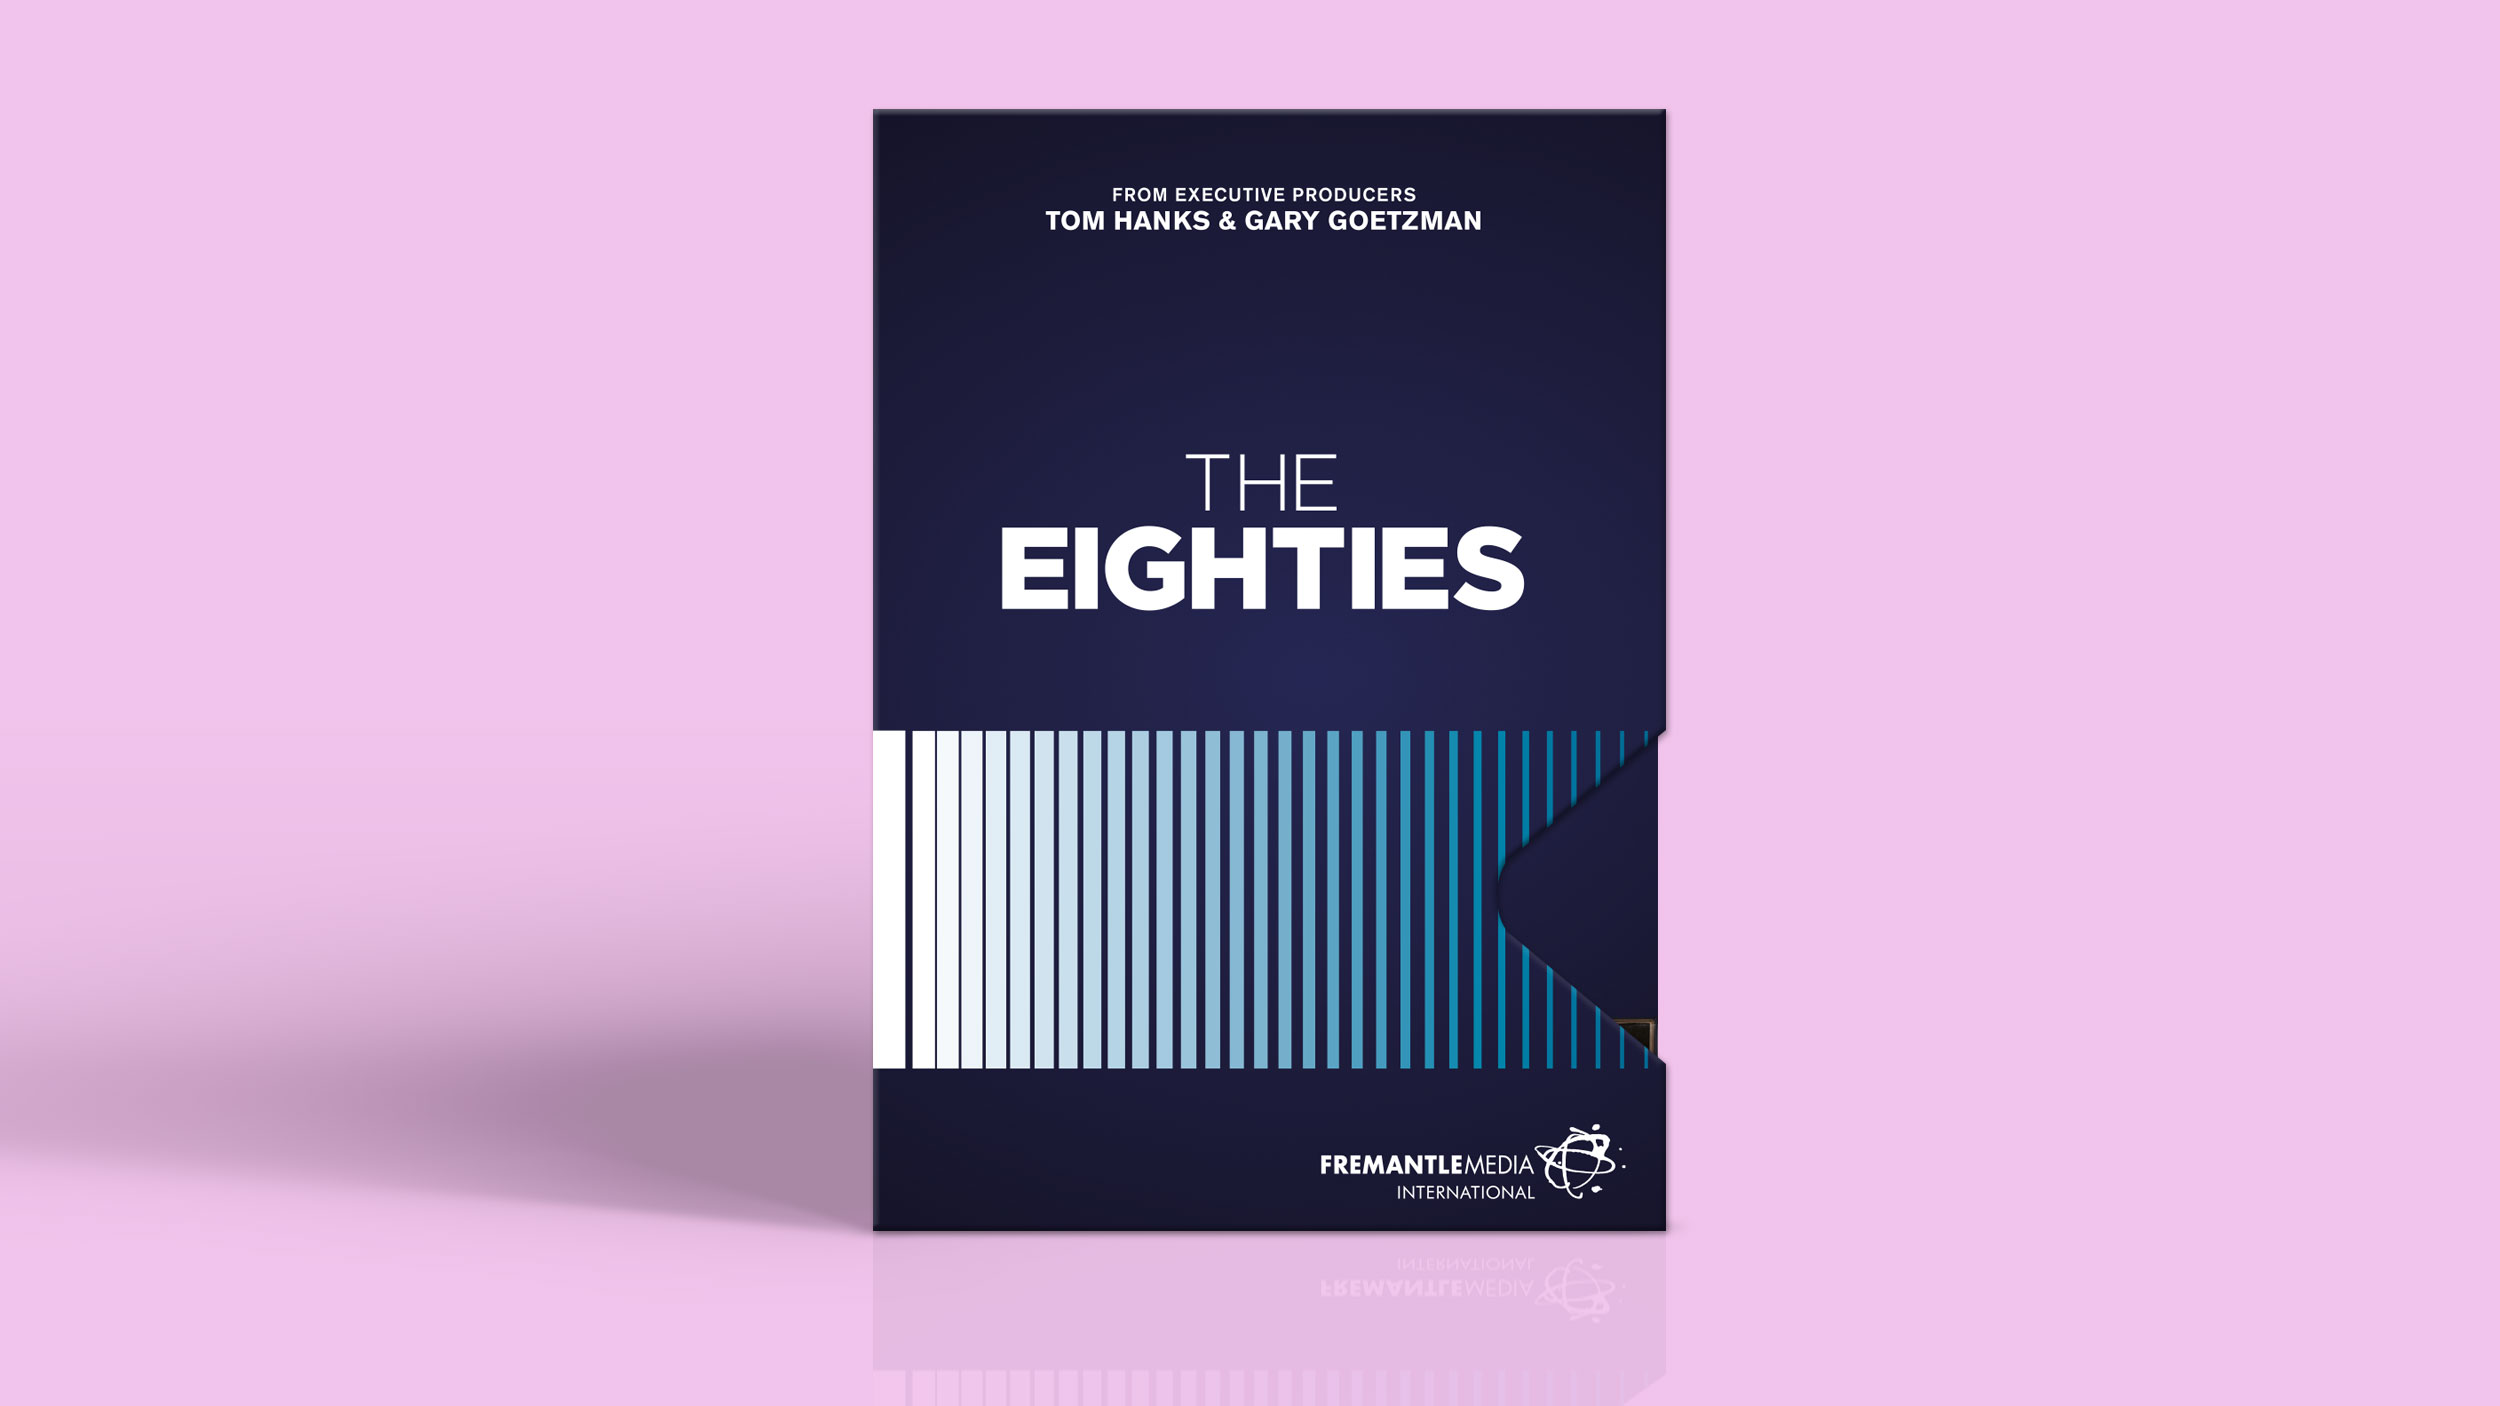 The Eighties – Brand Campaign